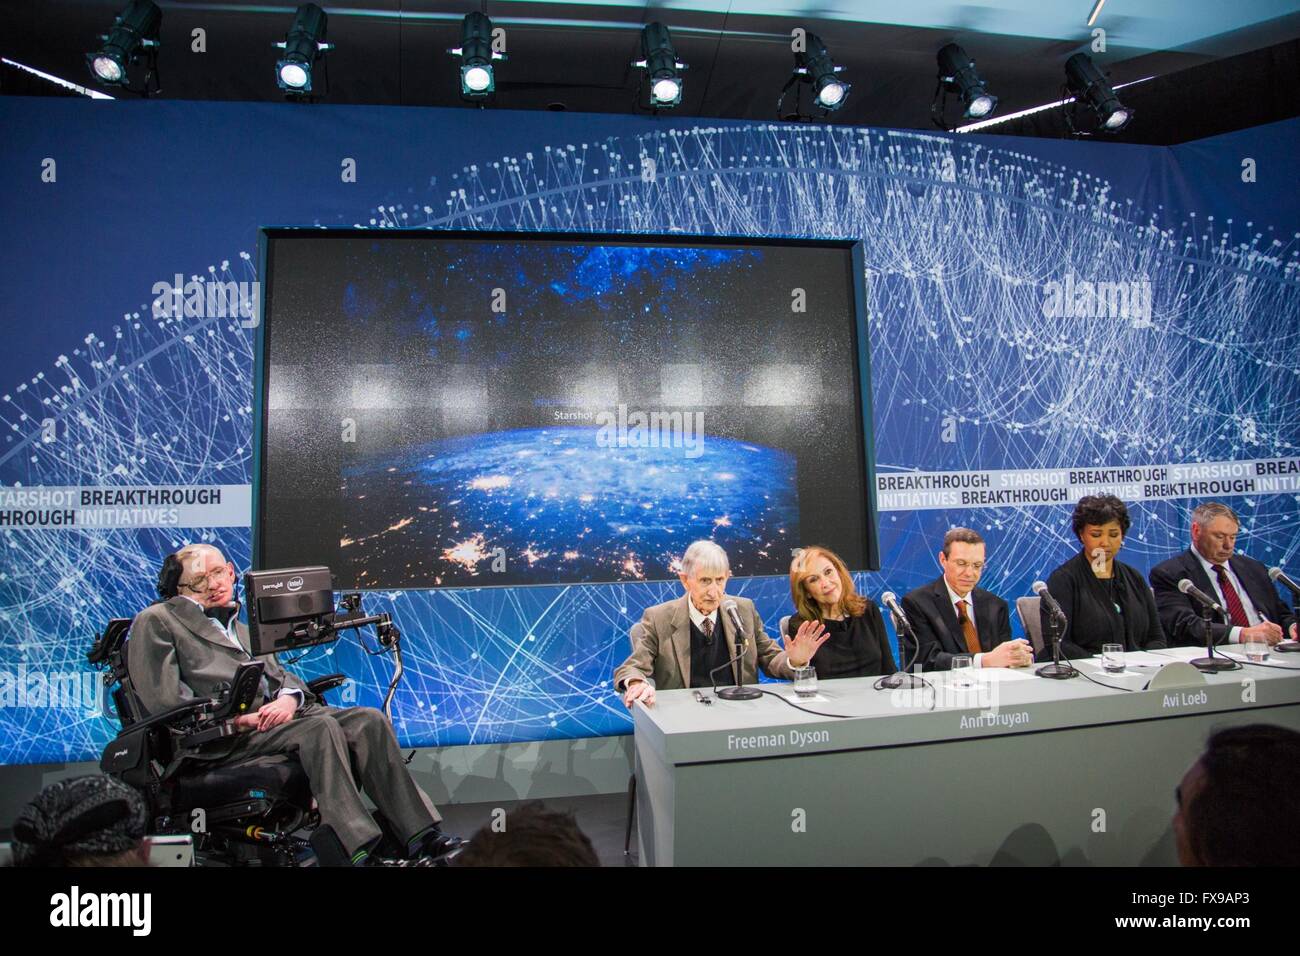 (160412) -- NEW YORK, April 12, 2016 (Xinhua) -- Theoretical physicist and mathematician Freeman Dyson (2nd, L) speaks at the 'StarShot' project press conference at One World Observatory in New York, the United States, April 12, 2016. Attendees are (R to L): former director of NASA's Ames Research Center Pete Worden, NASA astronaut Mae Jemison, theoretical physicist Avi Loeb, author and producer Ann Druyan, theoretical physicist and mathematician Freeman Dyson and astrophysicist Stephen Hawking. British astrophysicist Stephen Hawking announced here Tuesday he is teaming up with Russian billion Stock Photo